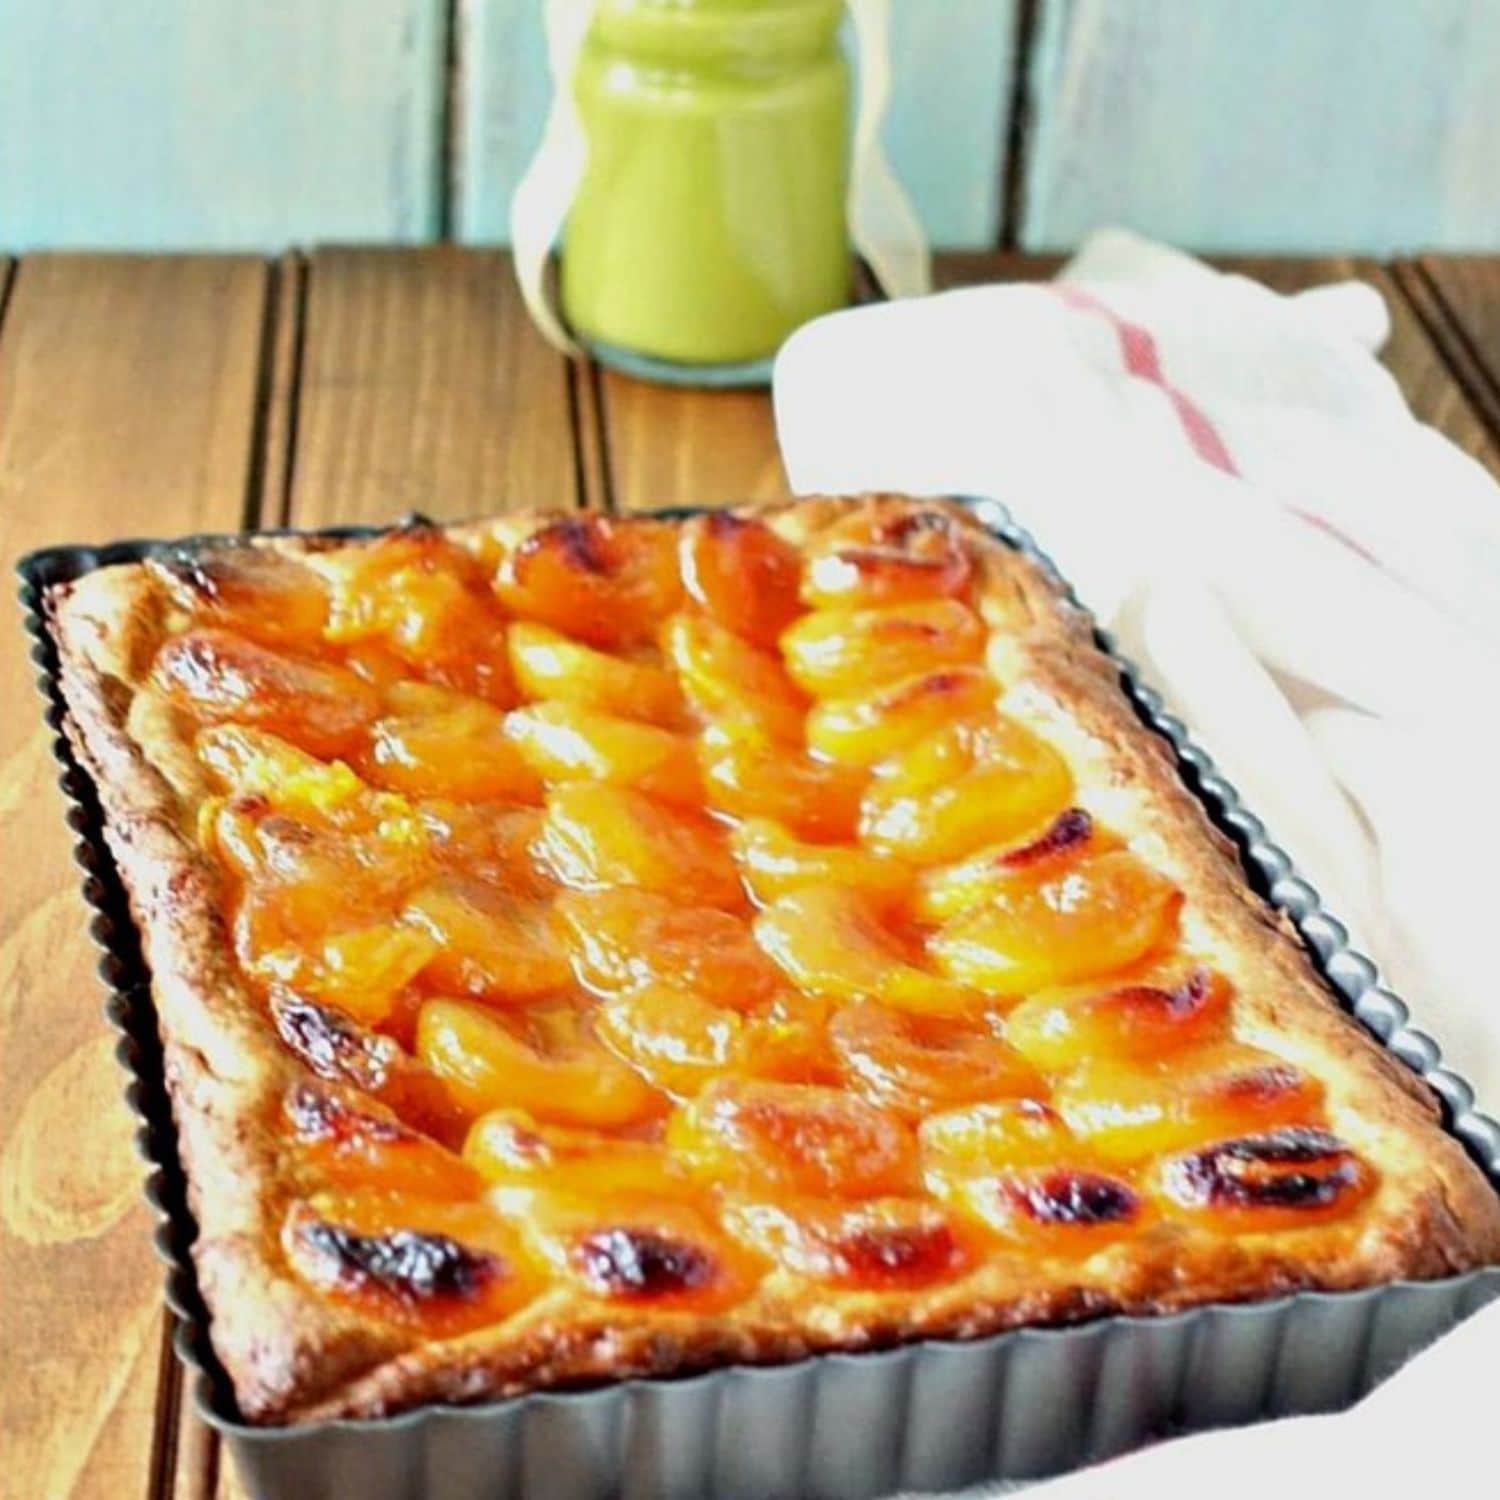 Dutch Apricot Tart on yeasted pie dough